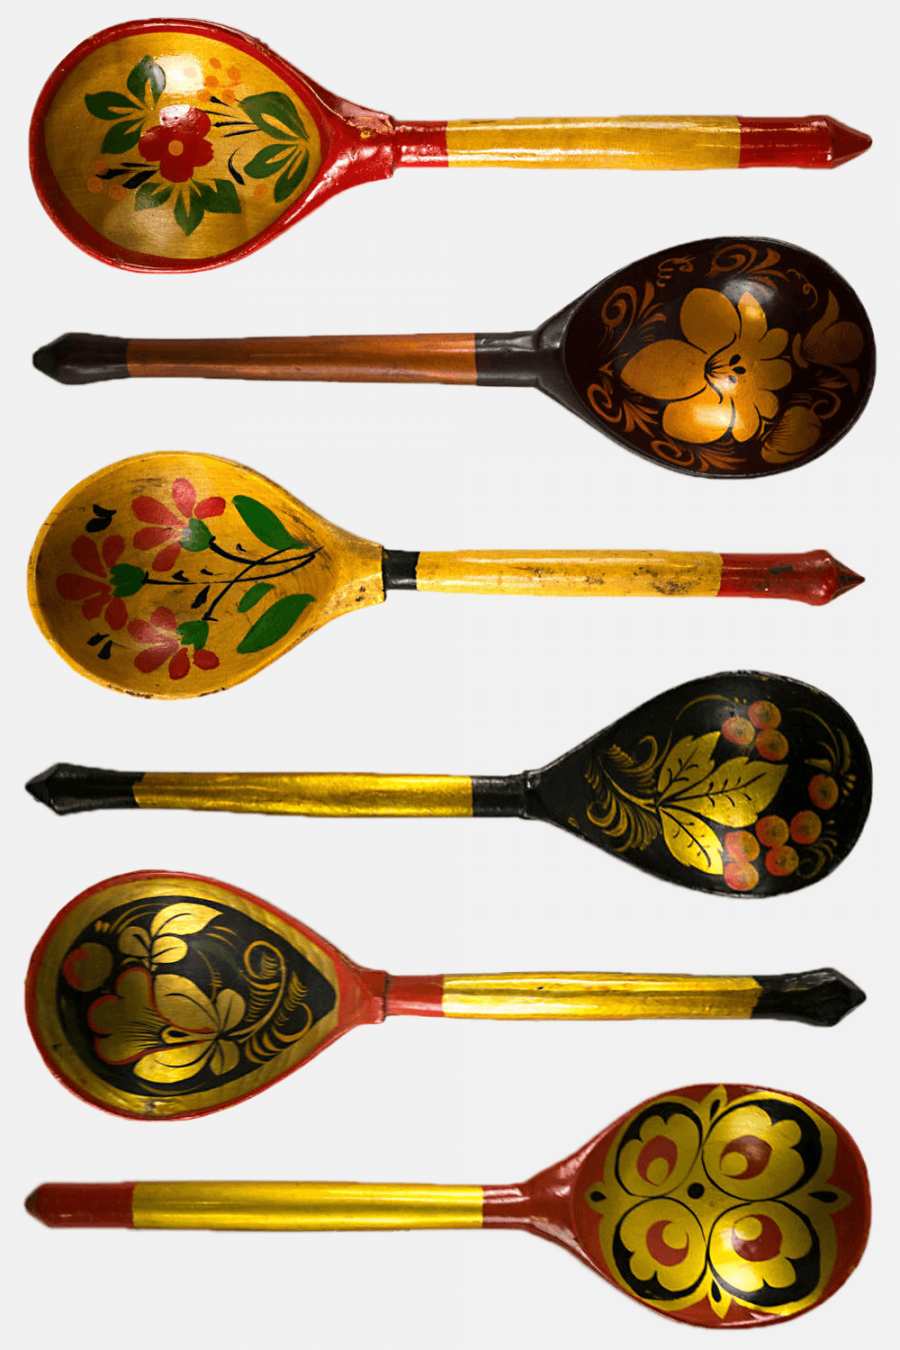 Collage of 6 painted wooden spoons from the Soviet Union